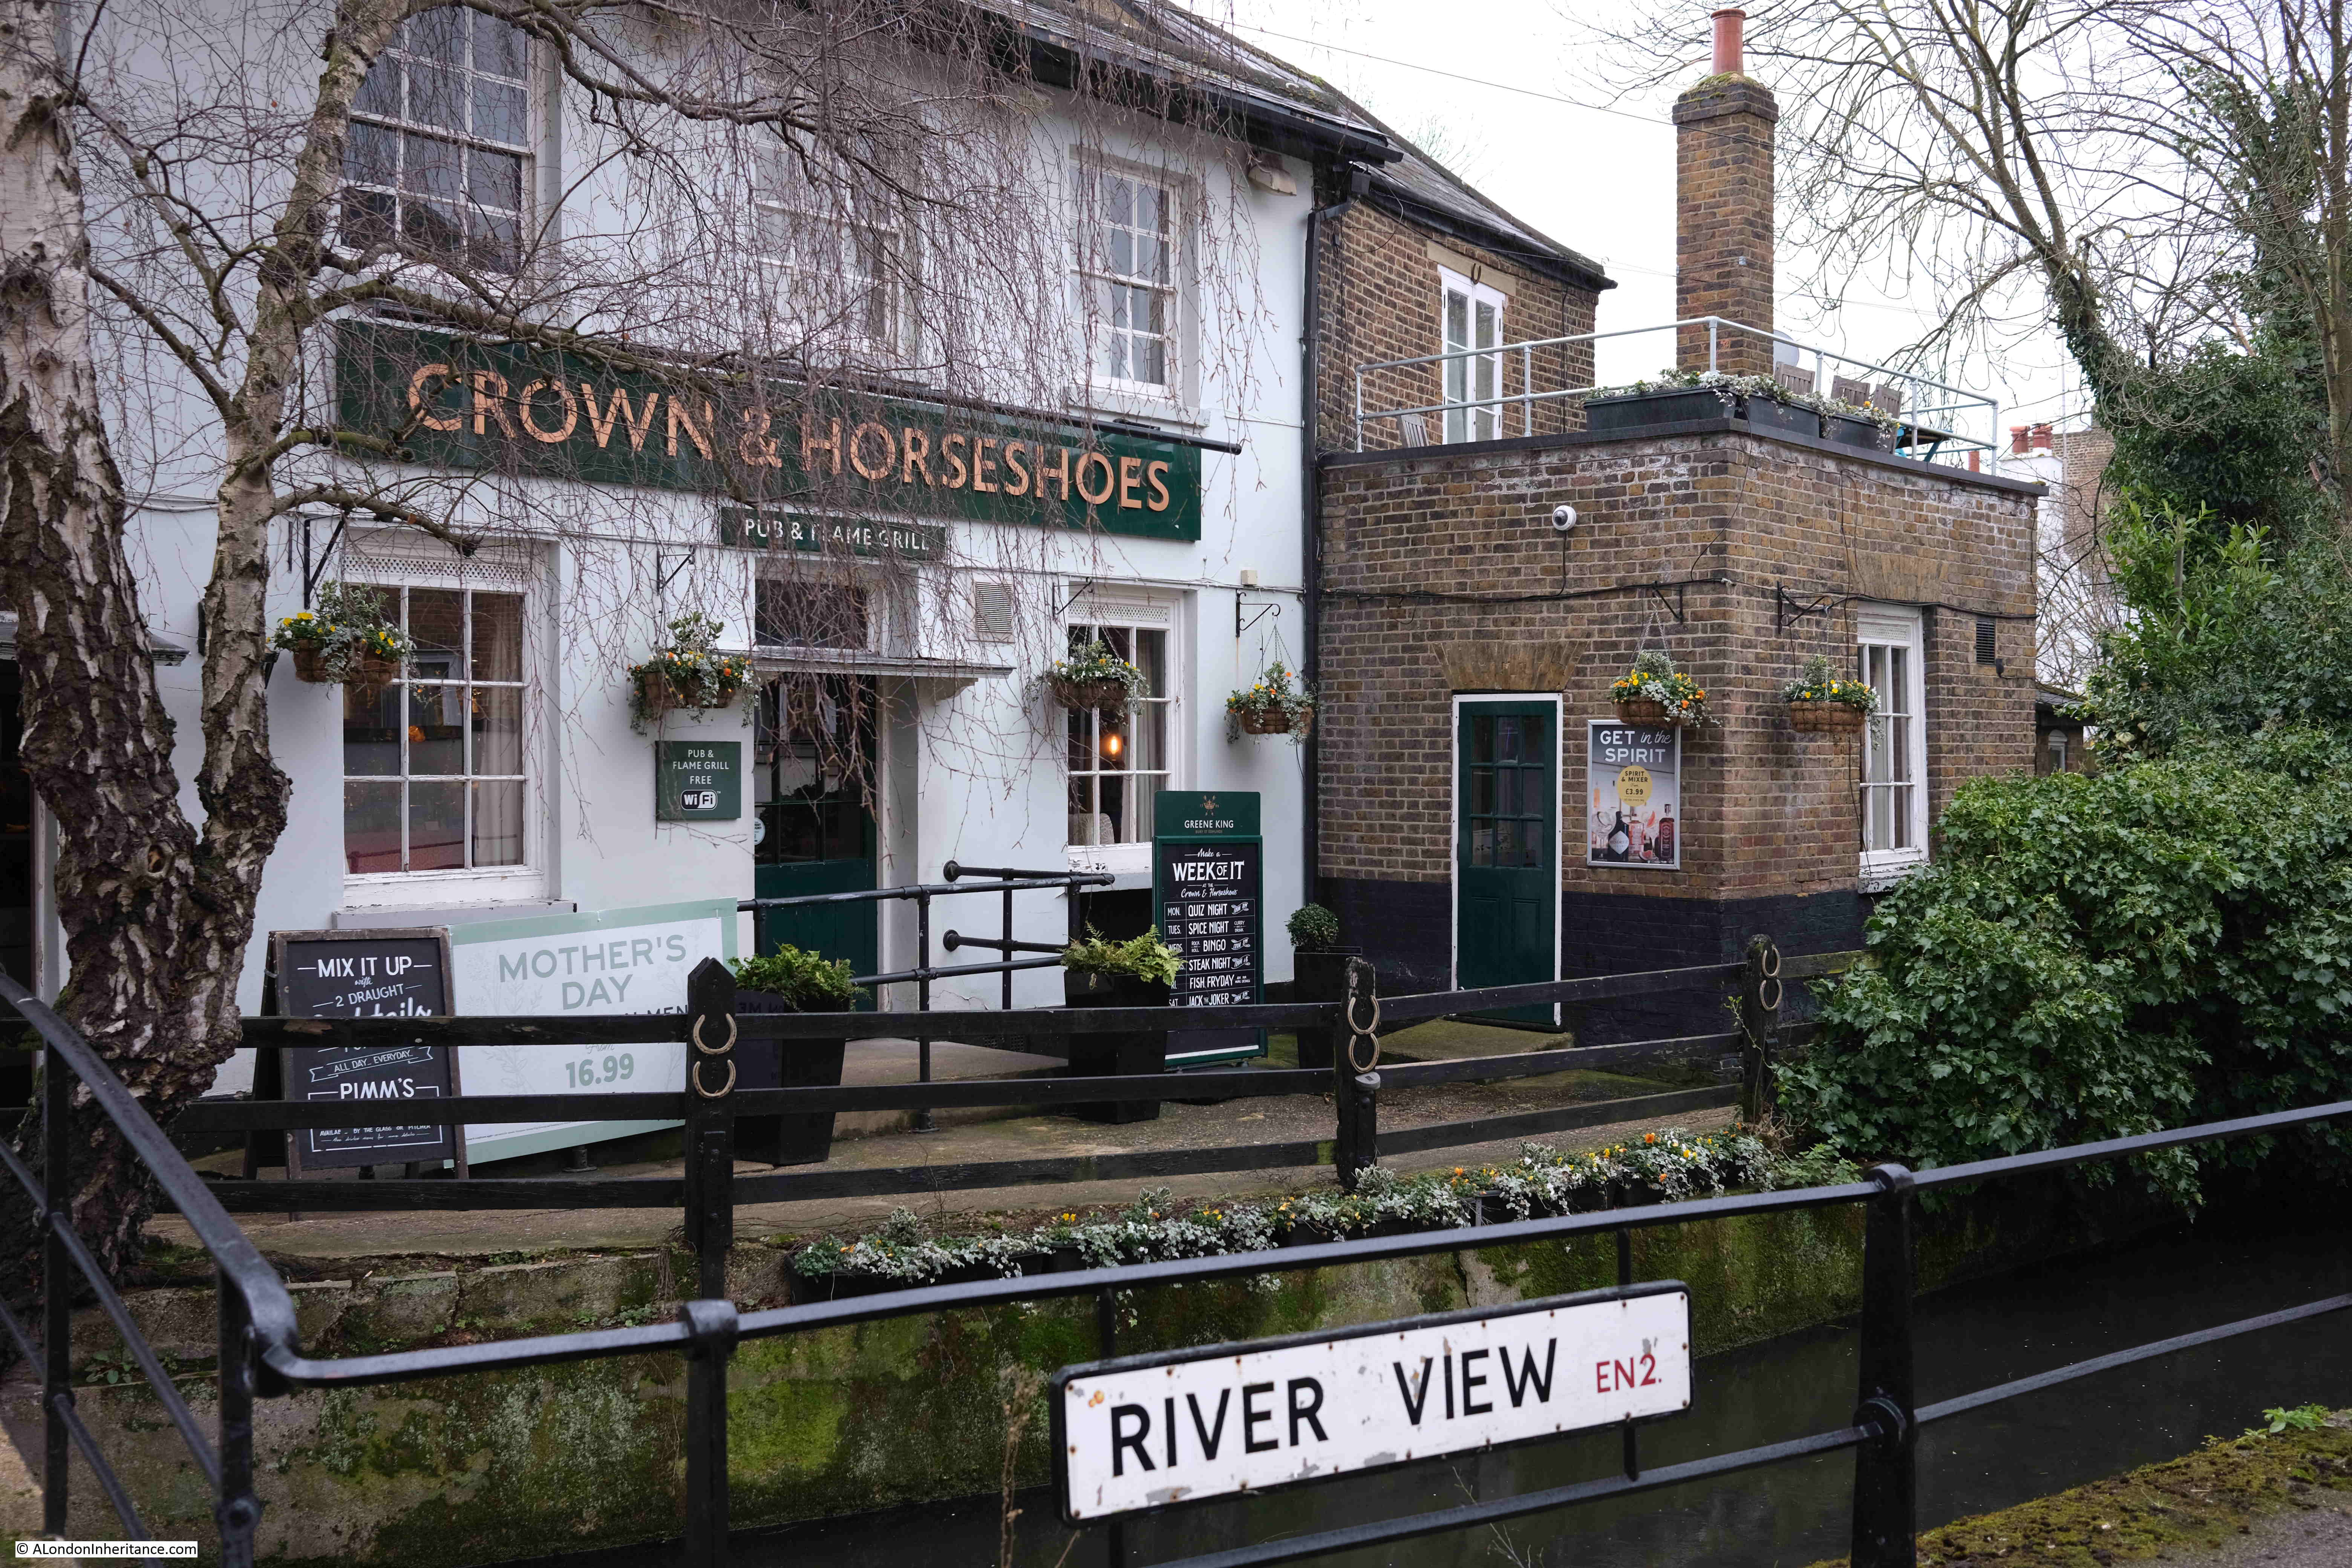 Crown and Horseshoes, River View, Enfield